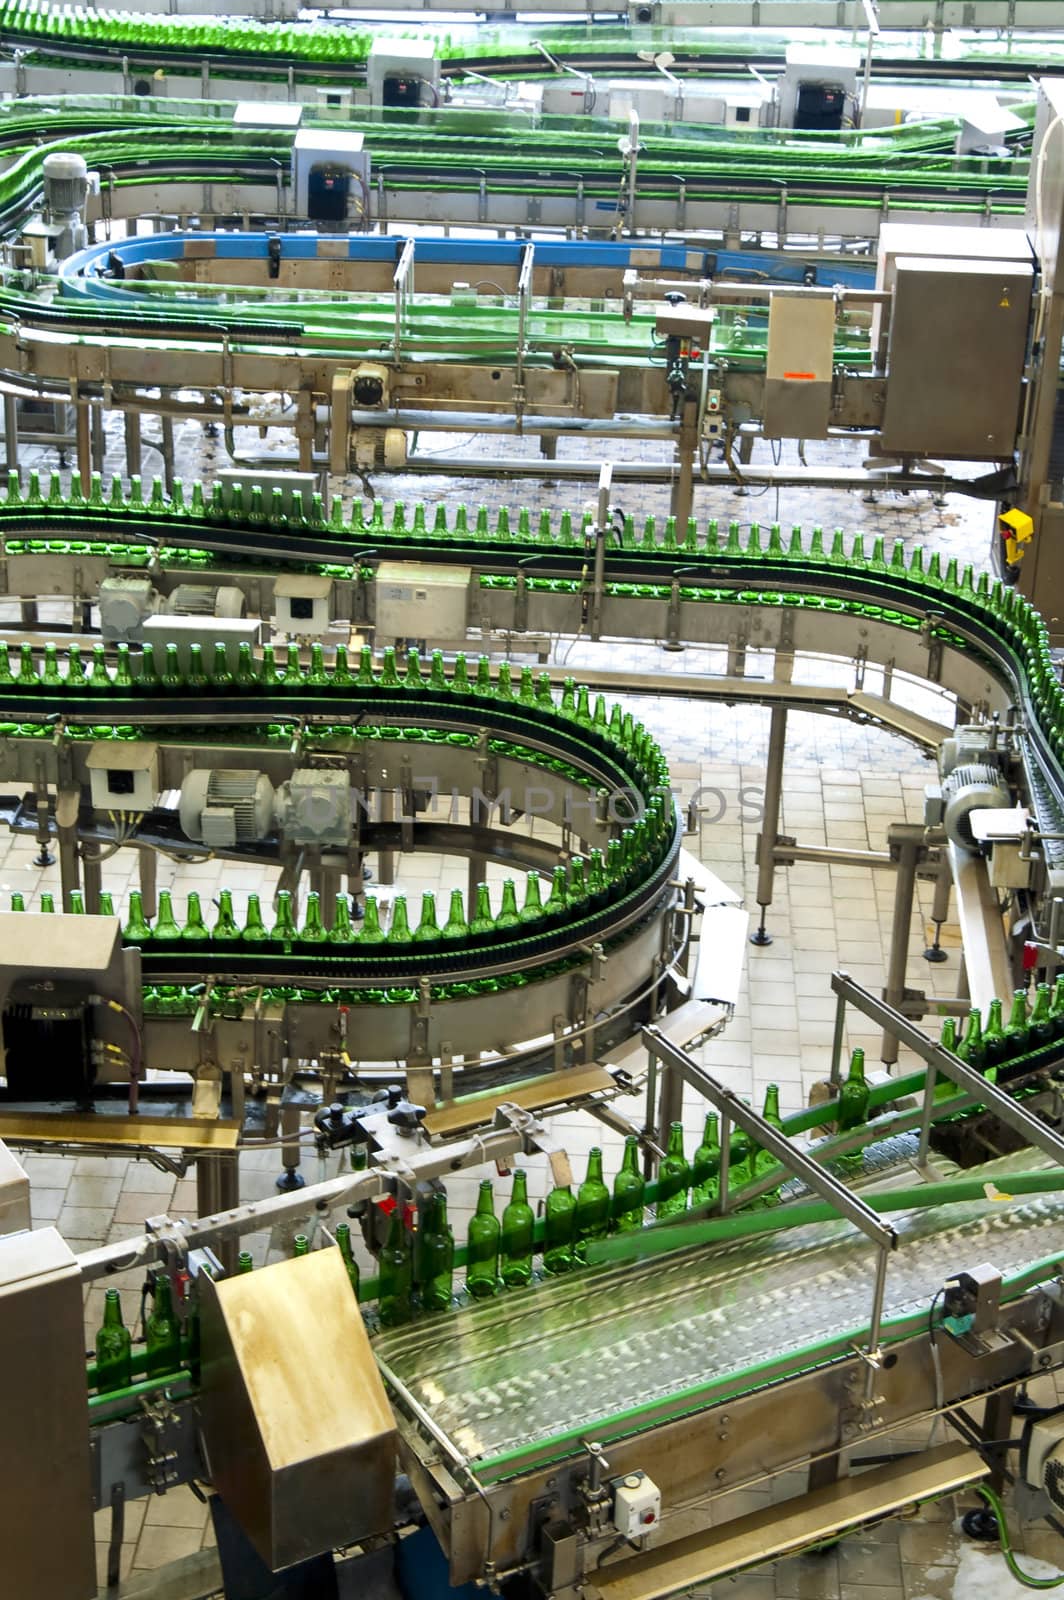 Budvar, Czech Republic - August 12:  Rows of green beer bottles going through a brewery line in Czech.  One of the most famous breweries in 2009.